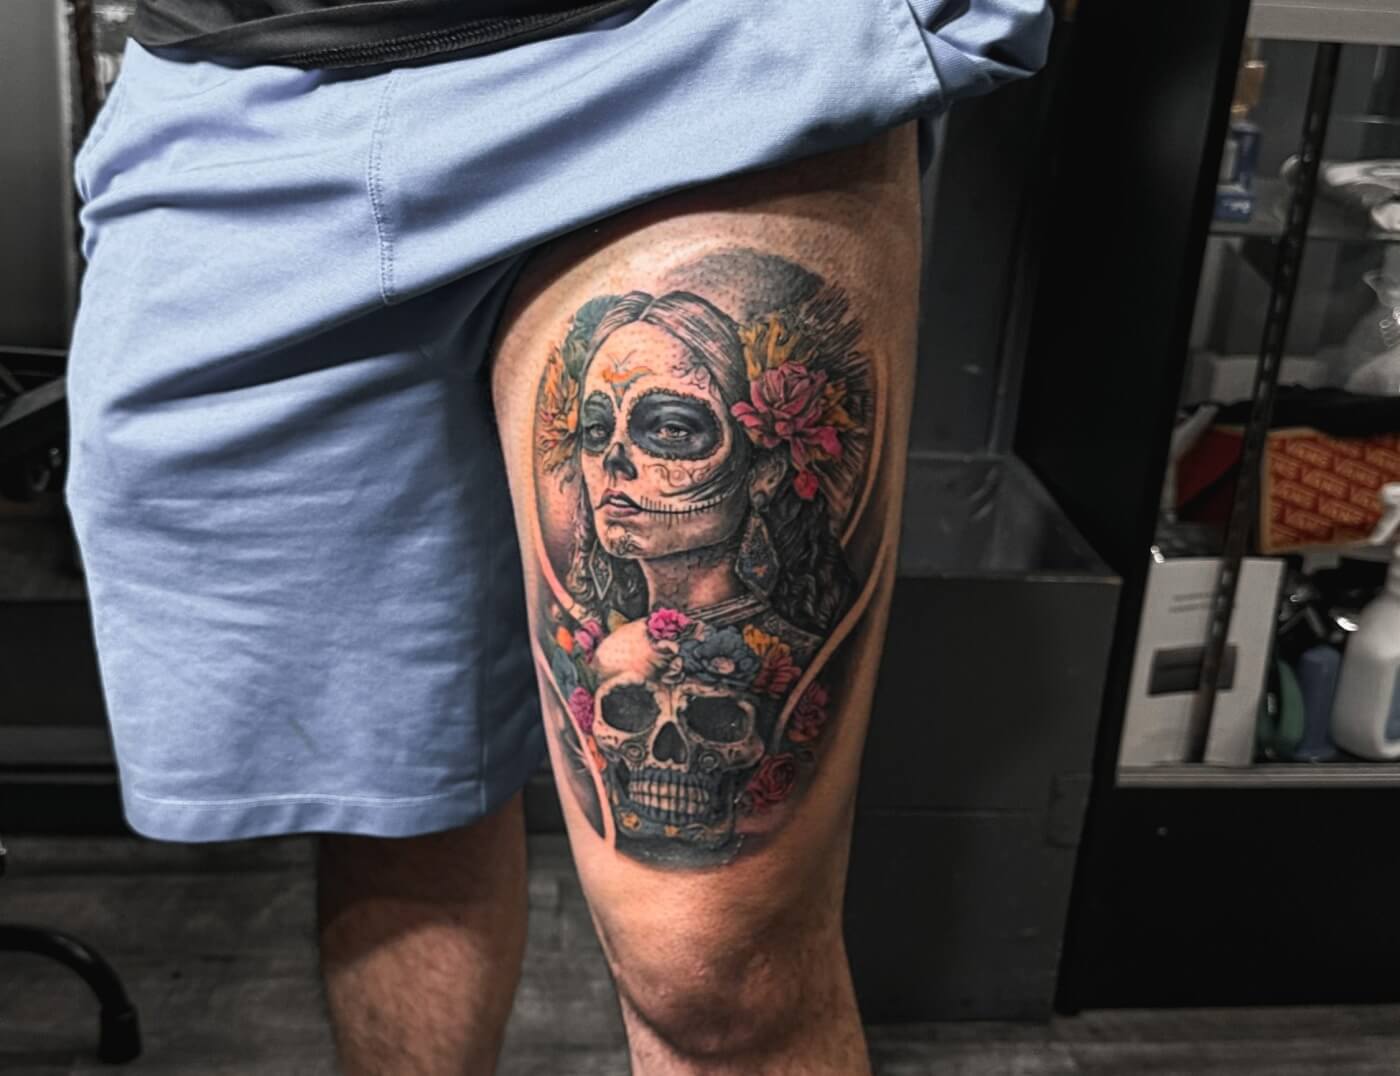 "Corpse Bride" Trash Polka Color Portrait Tattoo By Choze at Iron Palm Tattoos In Atlanta, GA. Choze is well known in Georgia for the precision & detail in his portrait tattoos. Call 404-973-7828 or stop by for a free consultation with Choze or another Iron Palm body artist.